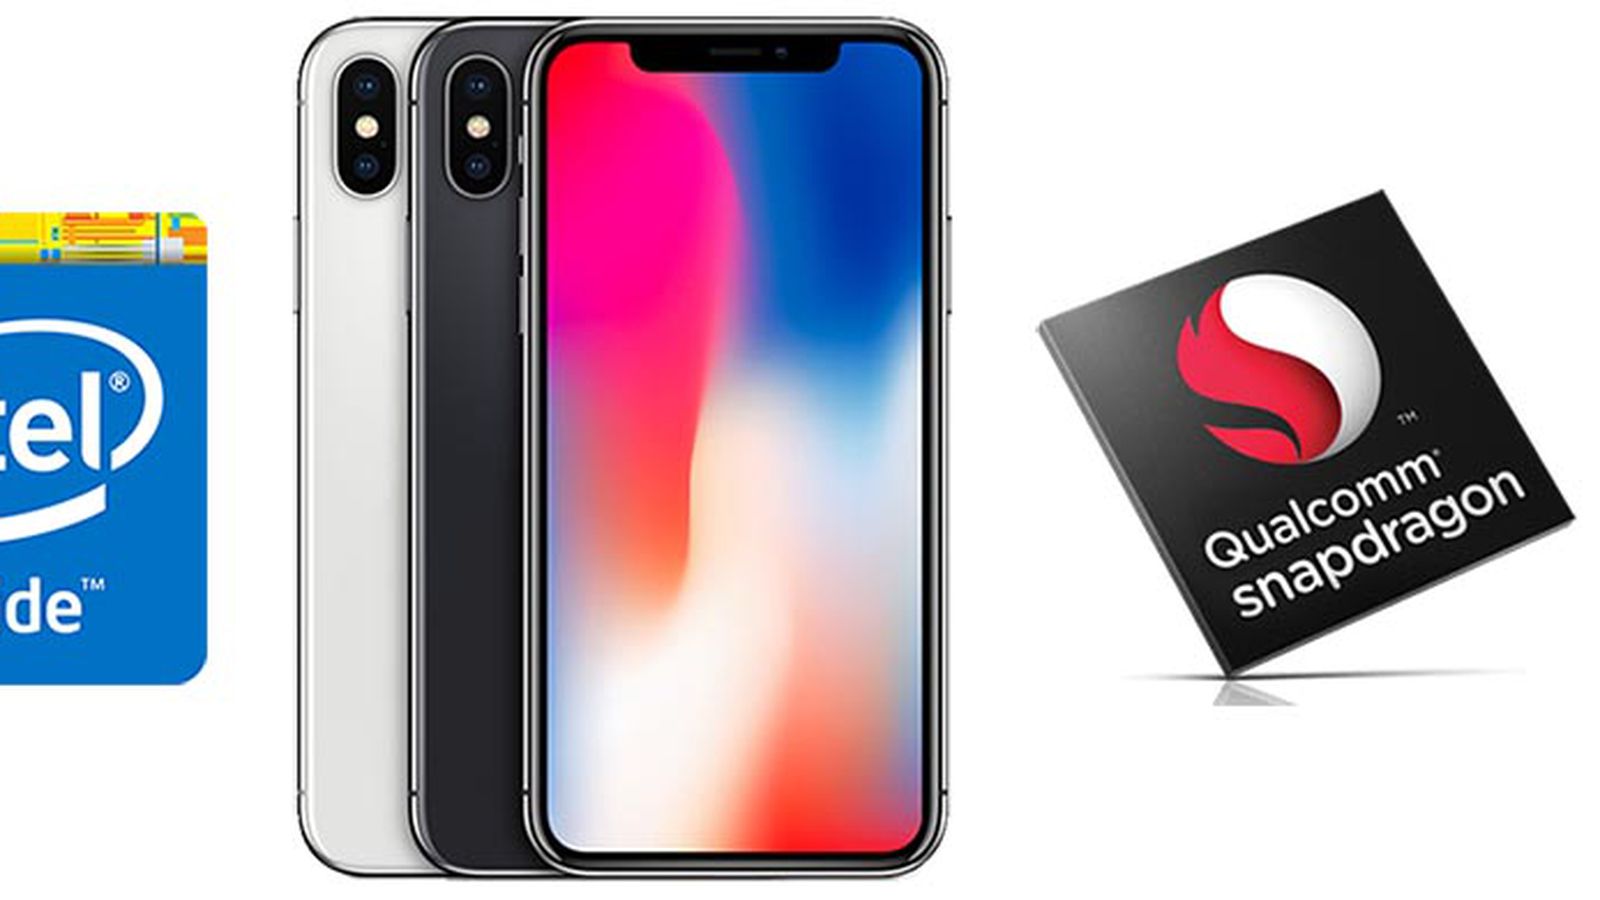 Iphone X Models With Qualcomm Modem Still Have Faster Lte Speeds Than Those With Intel Modems Macrumors